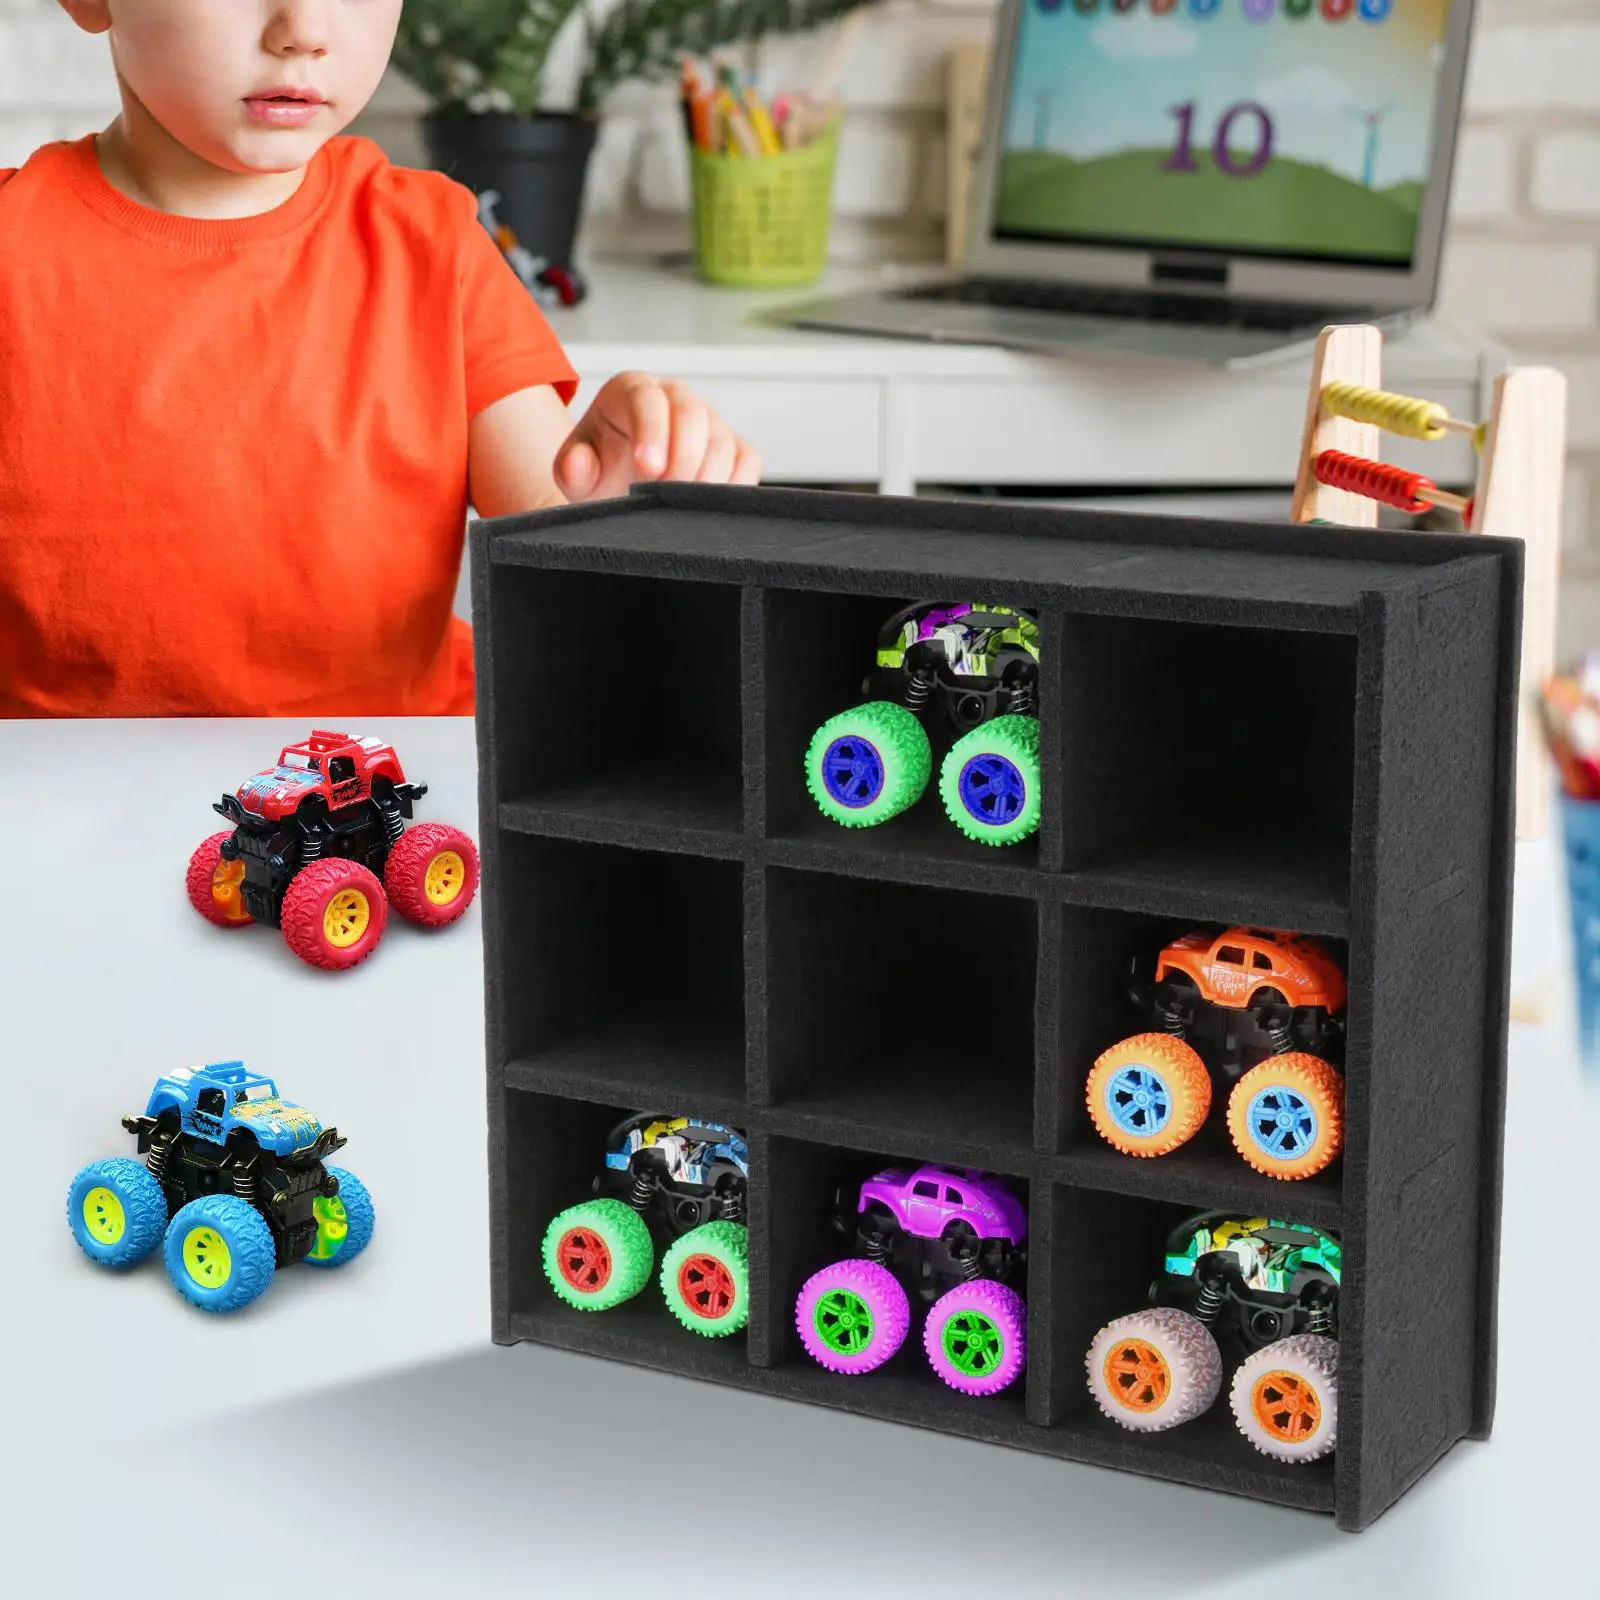 Monster Trucks Toy Wall Mount Display Case with 9 Slots Felt Material Compact DIY Assembled for Displaying Convenient